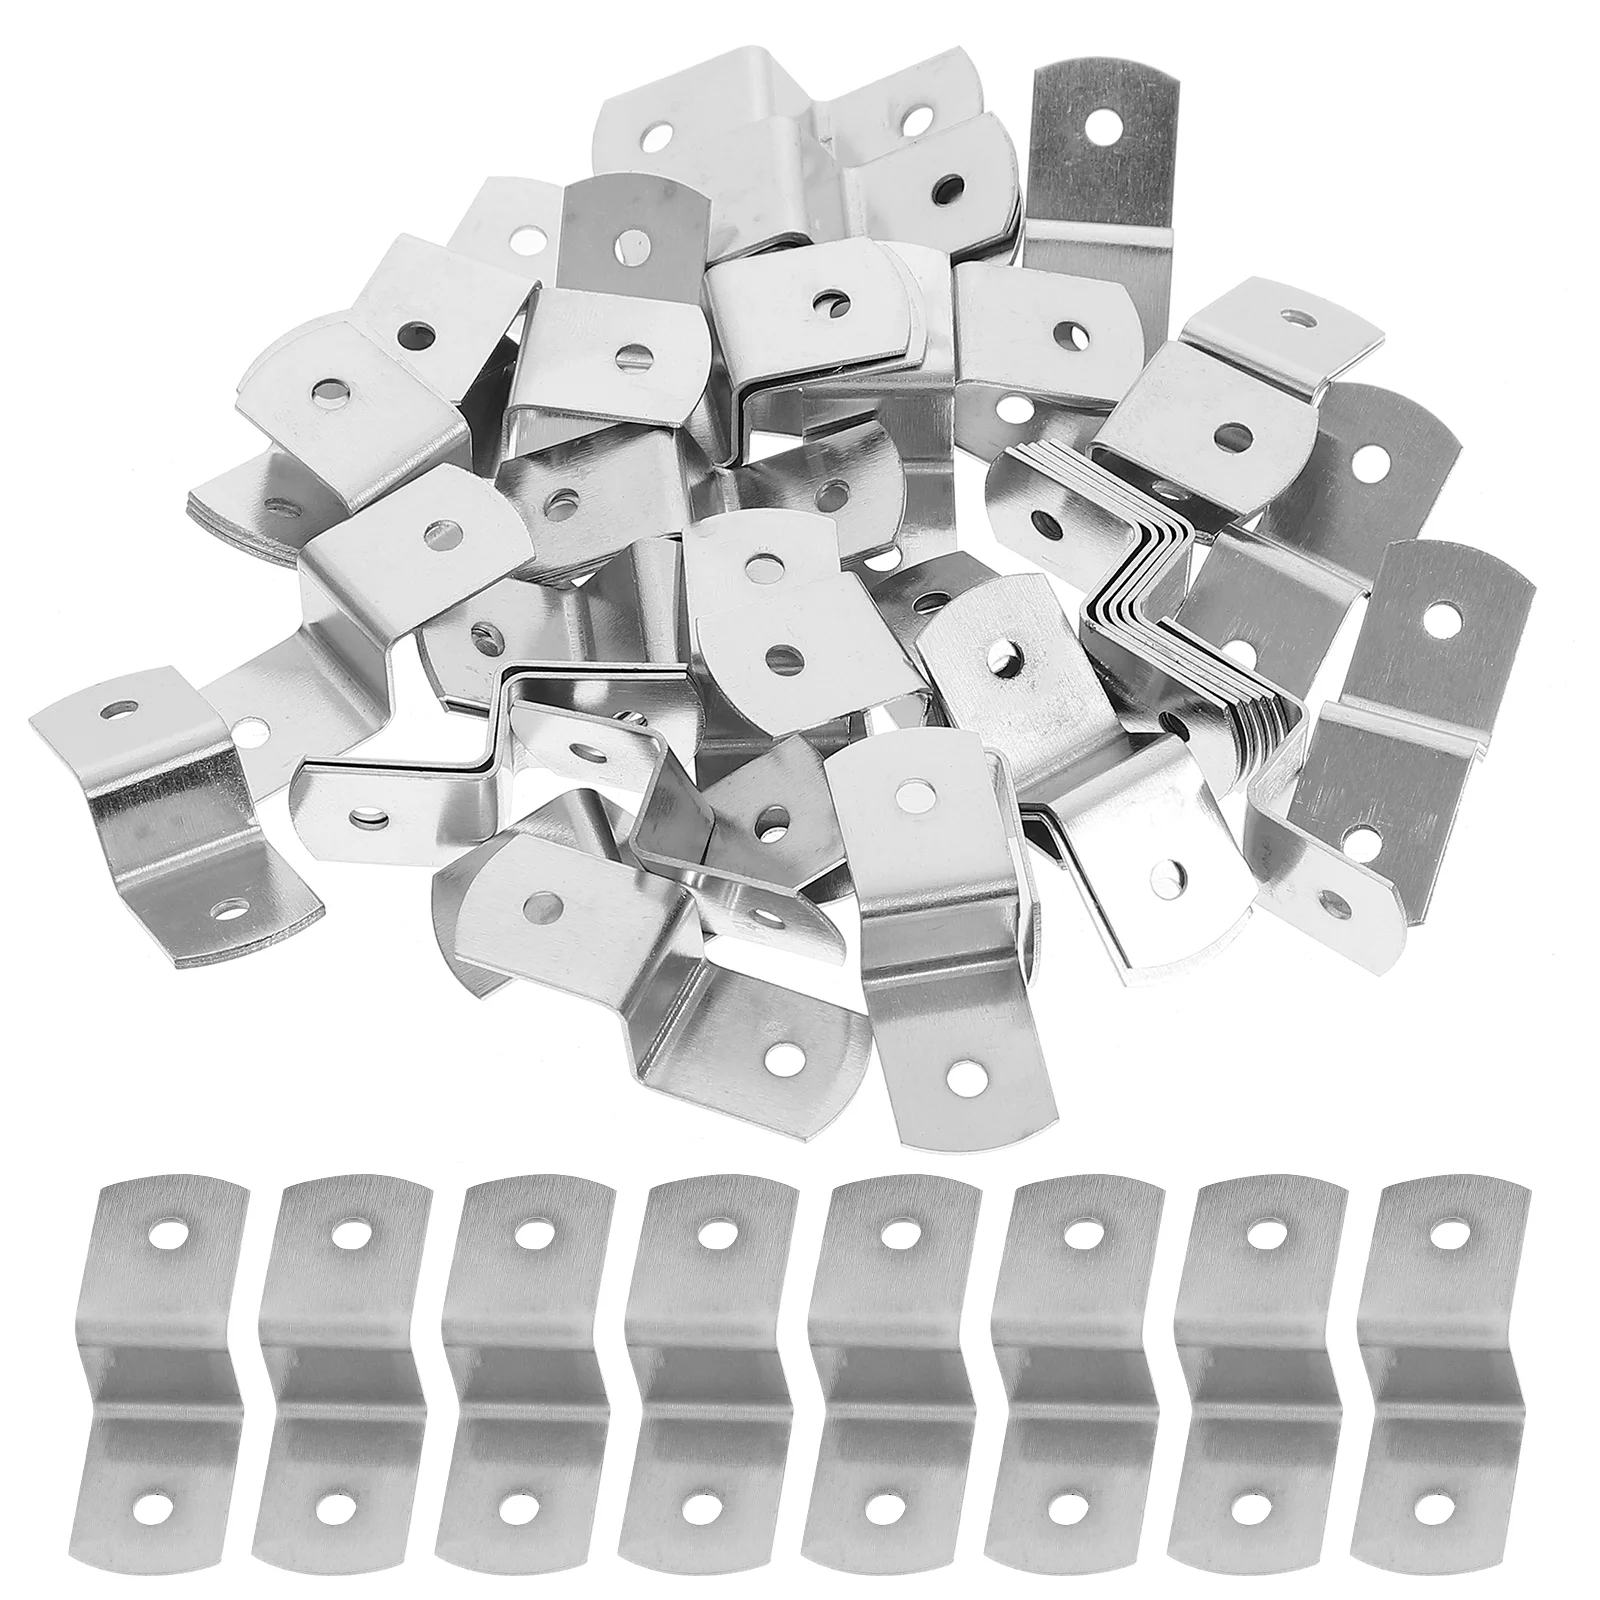 100 Pcs Canvas Clips Profile Connector Picture Frame Stand Z Table Tops Angle Bracket Fastener Hooks Shelf Brackets